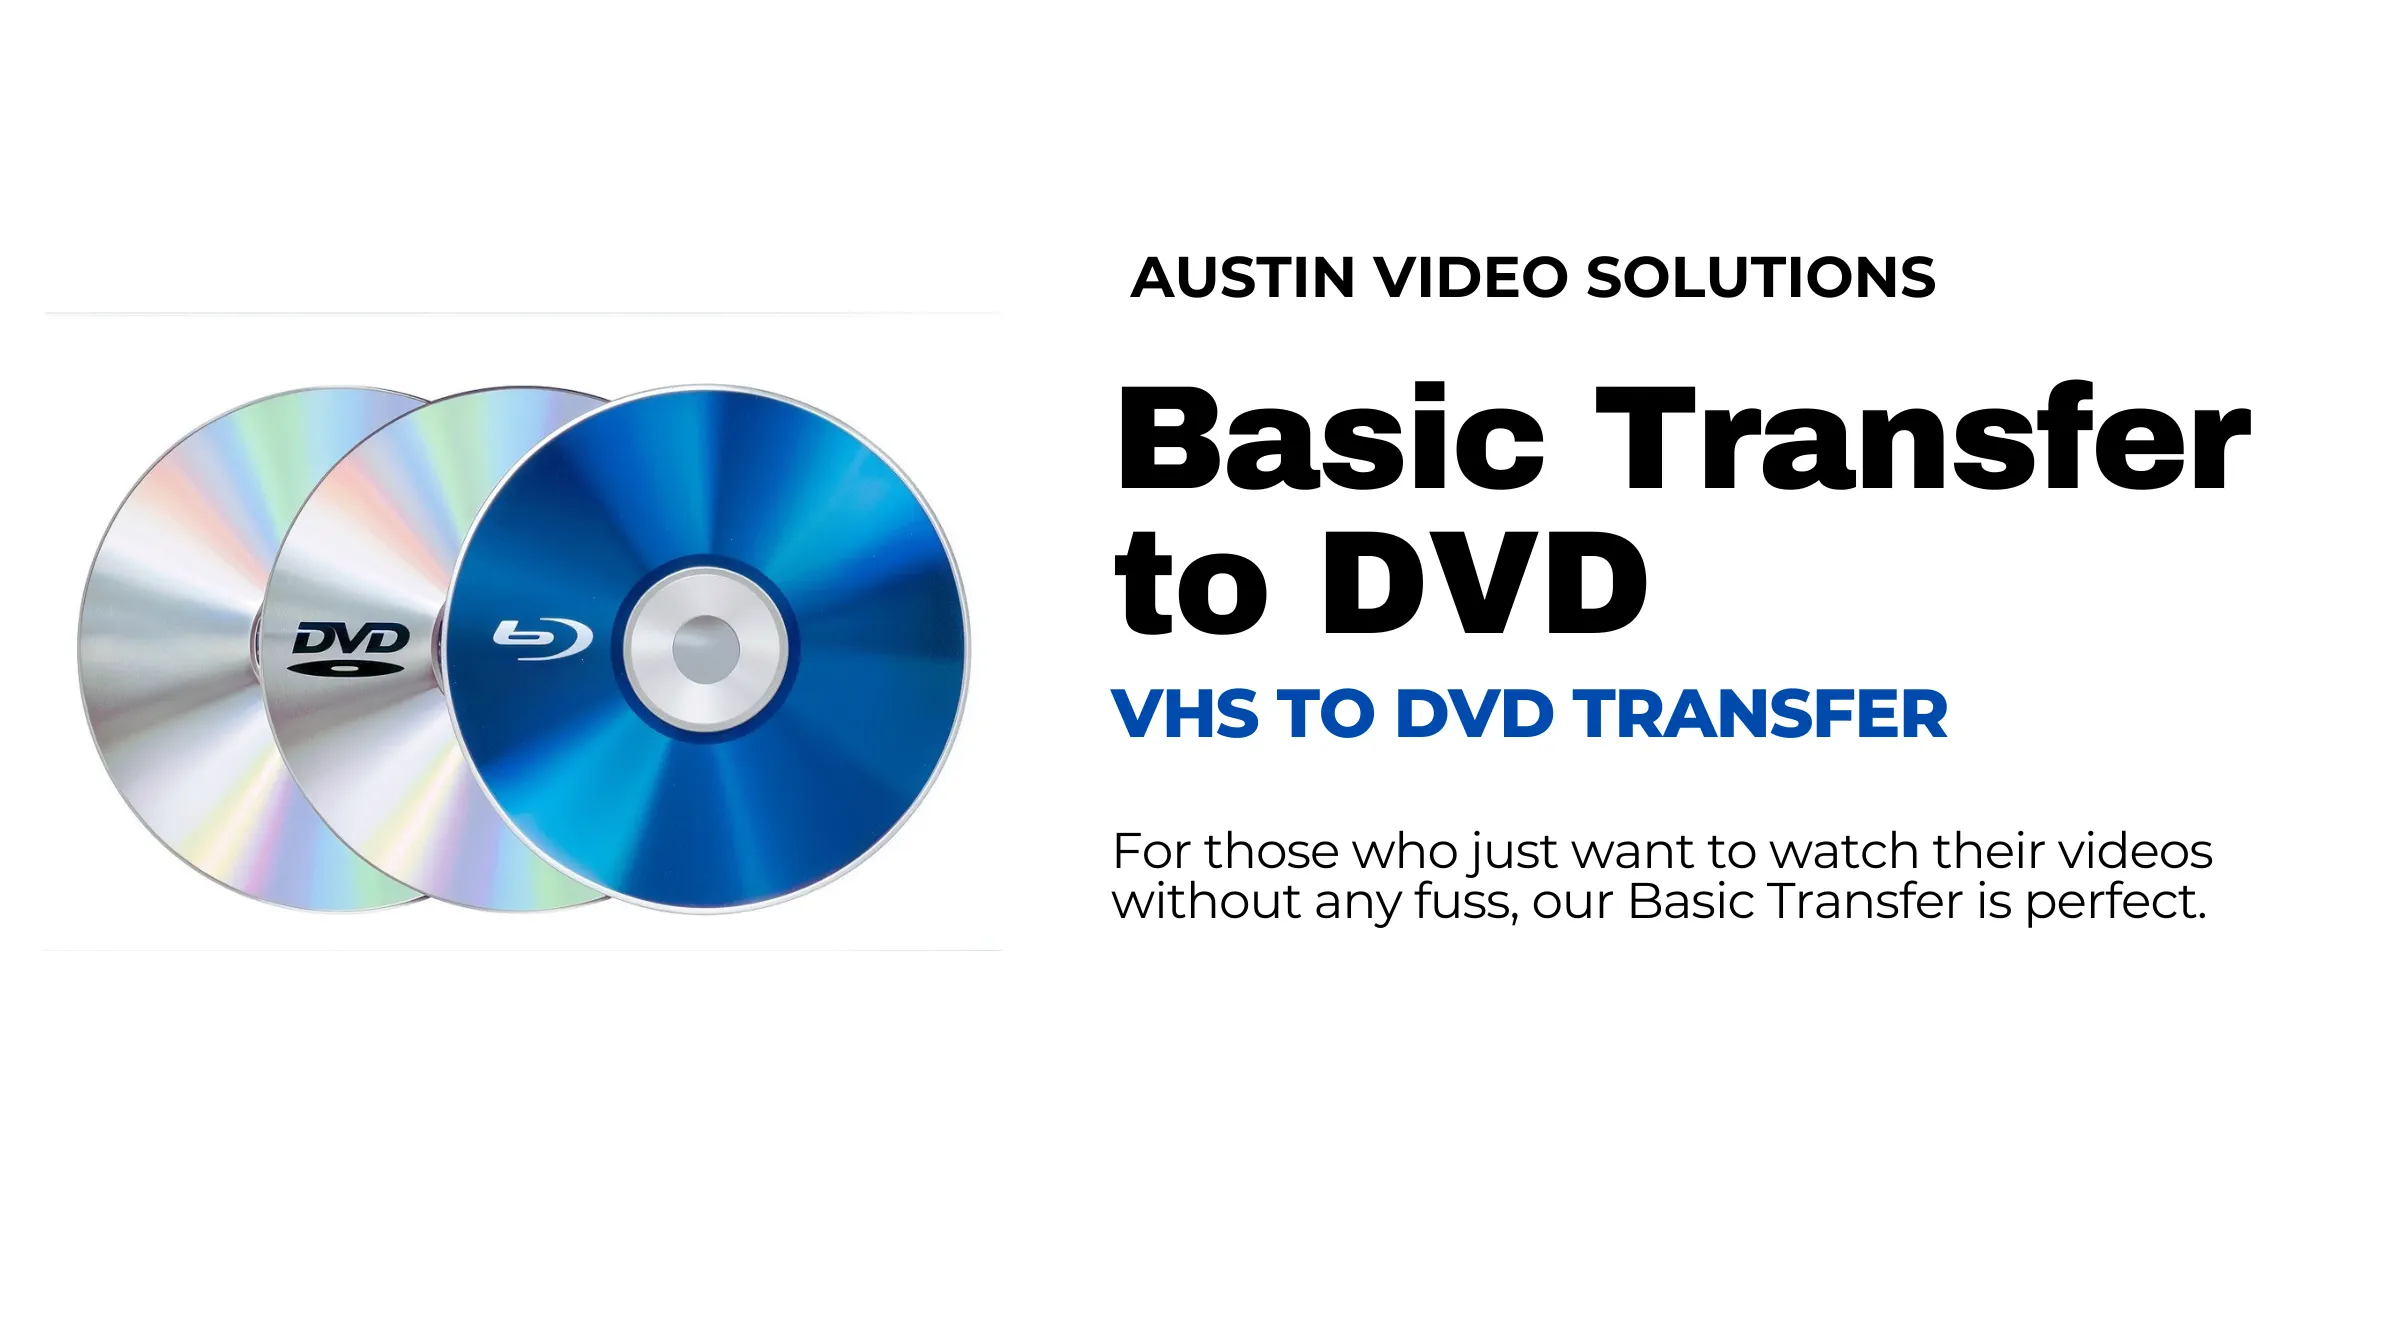 Austin Video Solutions offers professional video editing and post-production services, specializing in videotape conversion.